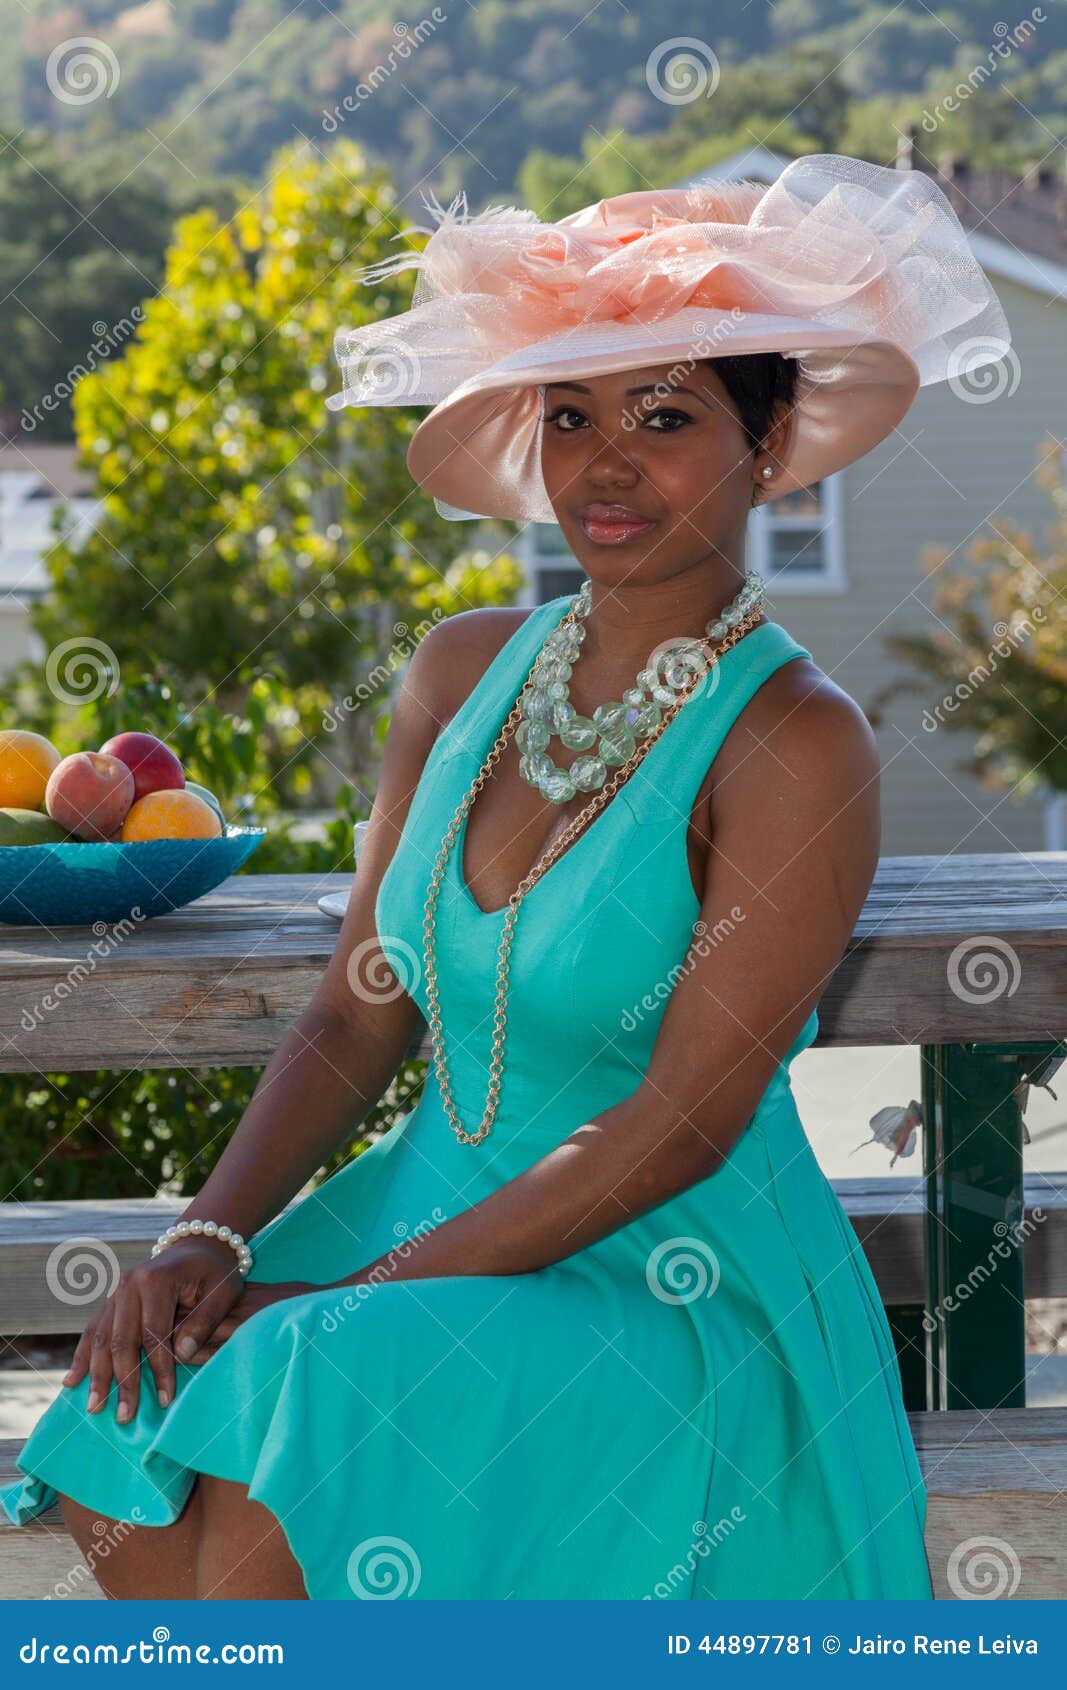 Wearing Green Dress and Beautiful Hat Stock Image - Image of portraits ...